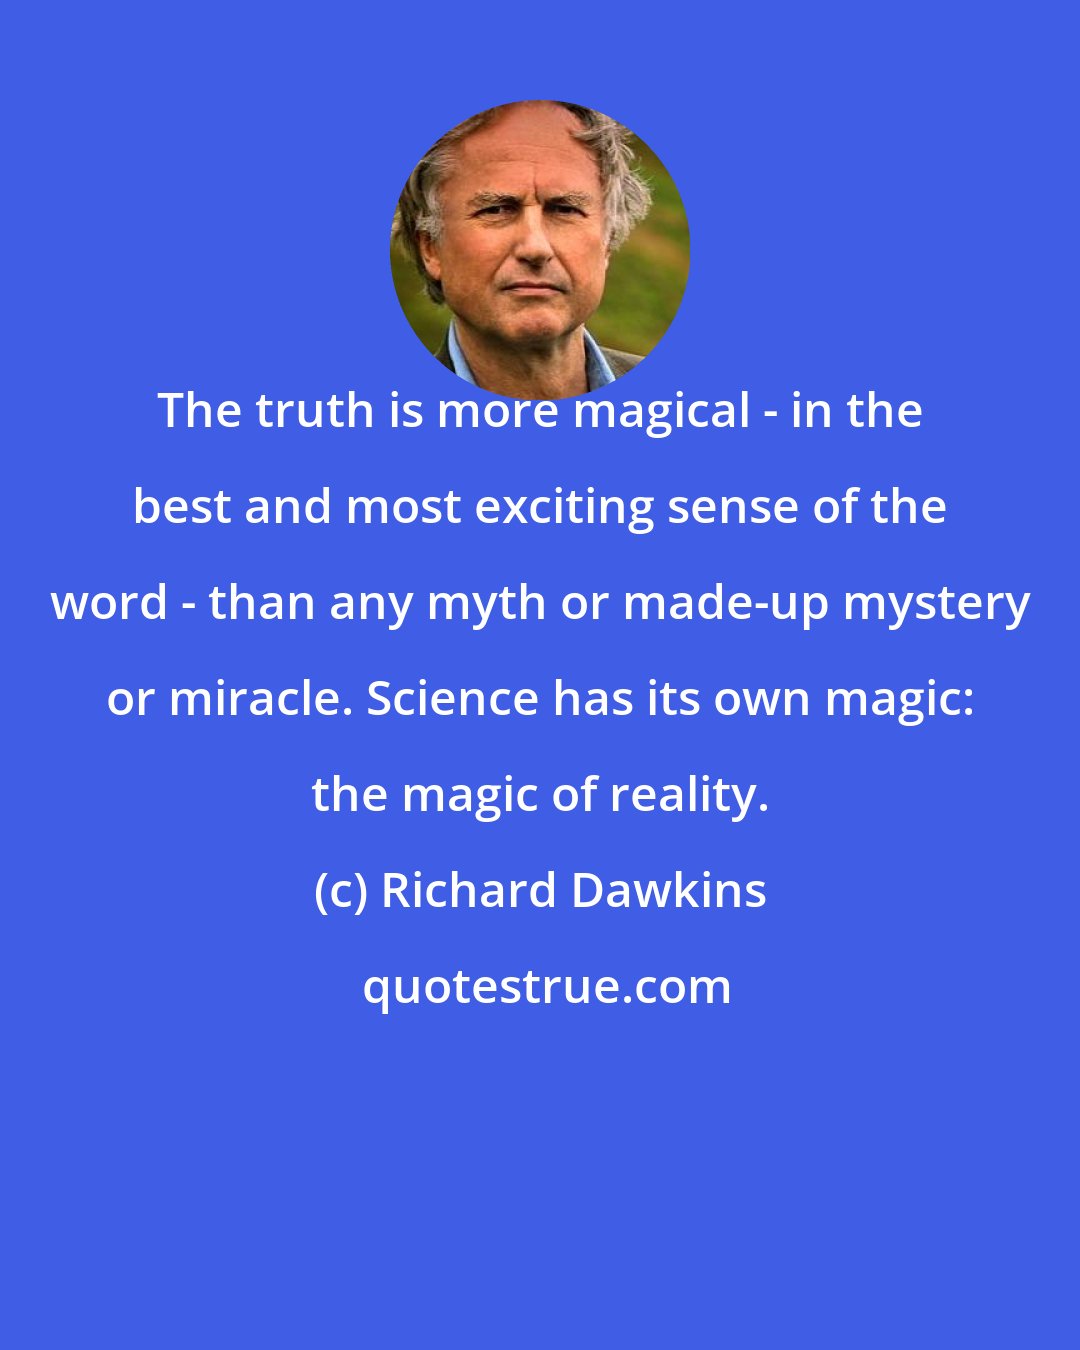 Richard Dawkins: The truth is more magical - in the best and most exciting sense of the word - than any myth or made-up mystery or miracle. Science has its own magic: the magic of reality.